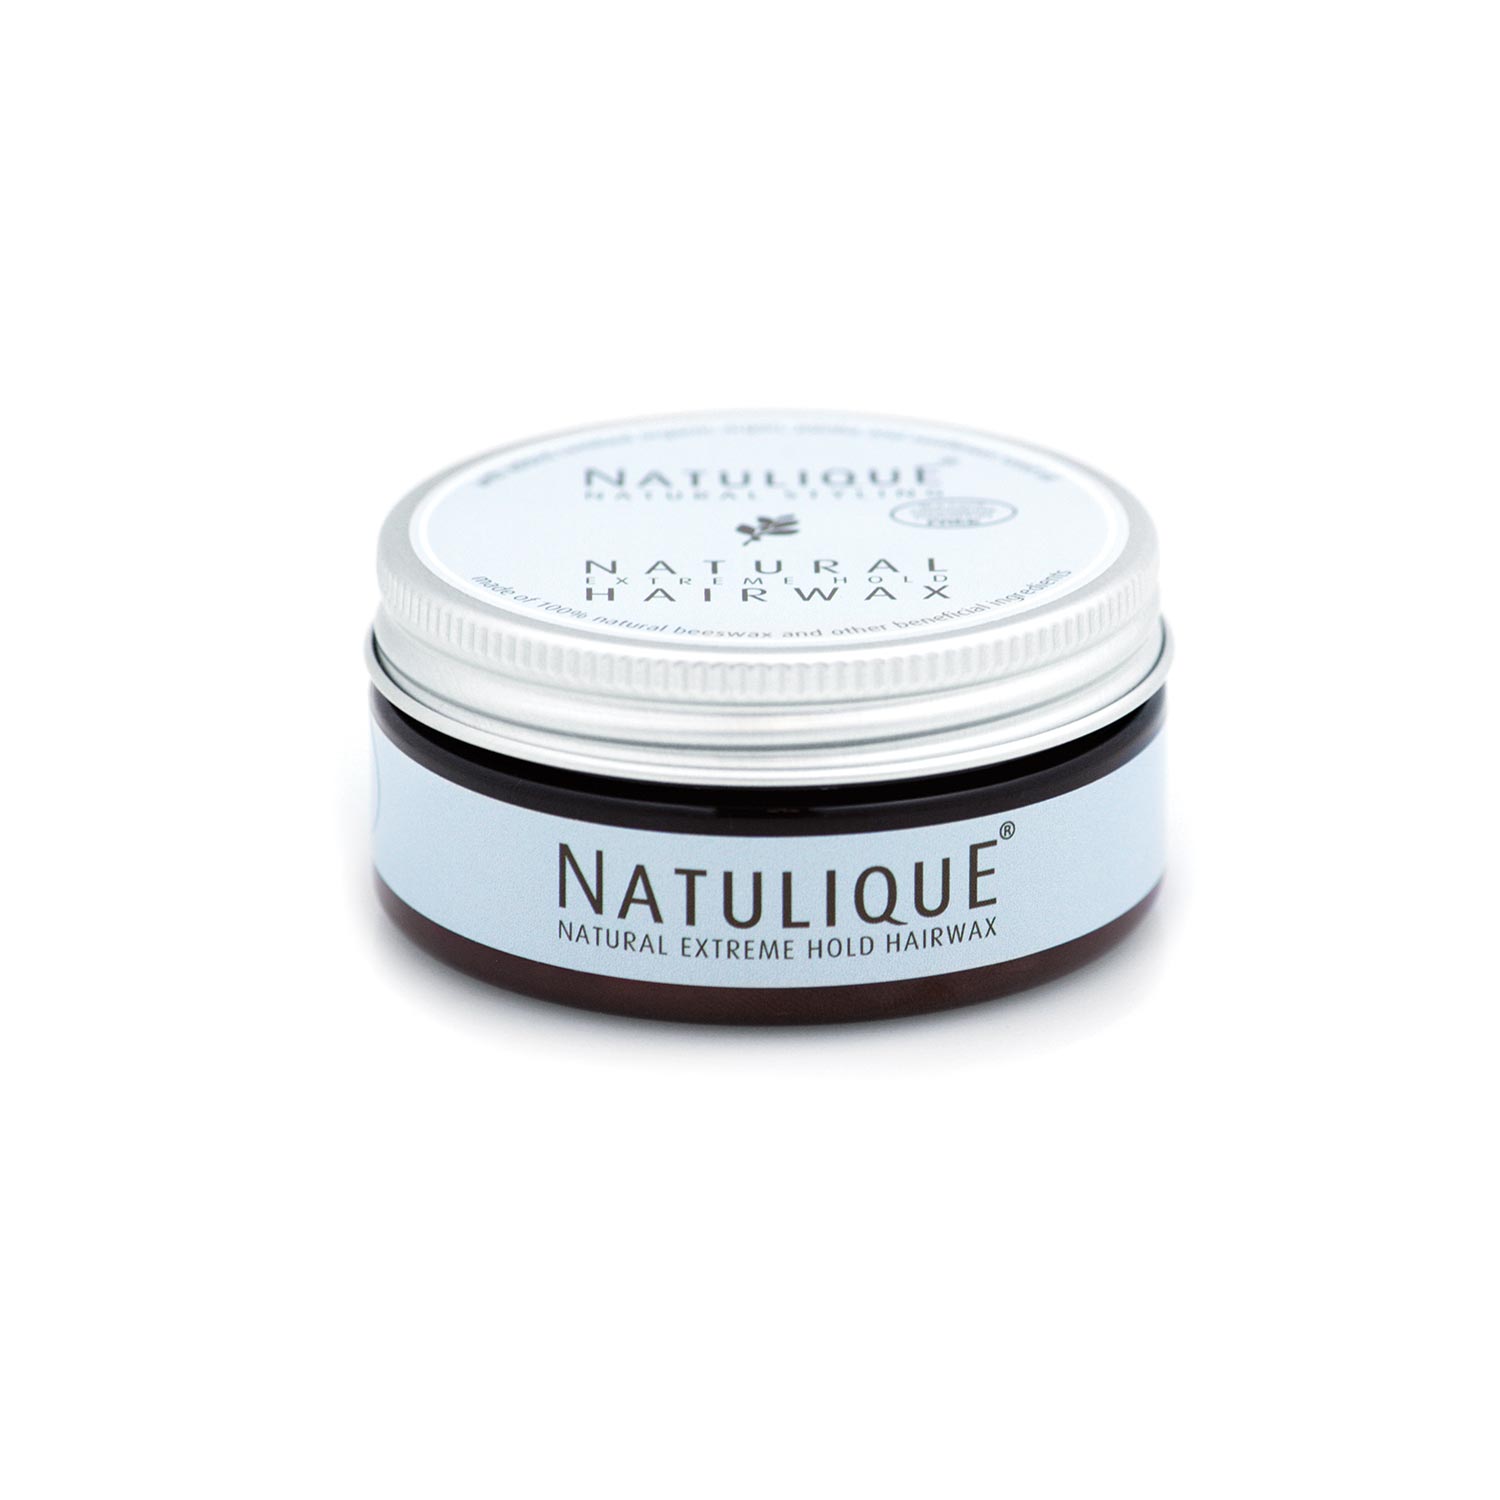 Natulique-Natural-Extreme-Hold-Hairwax-